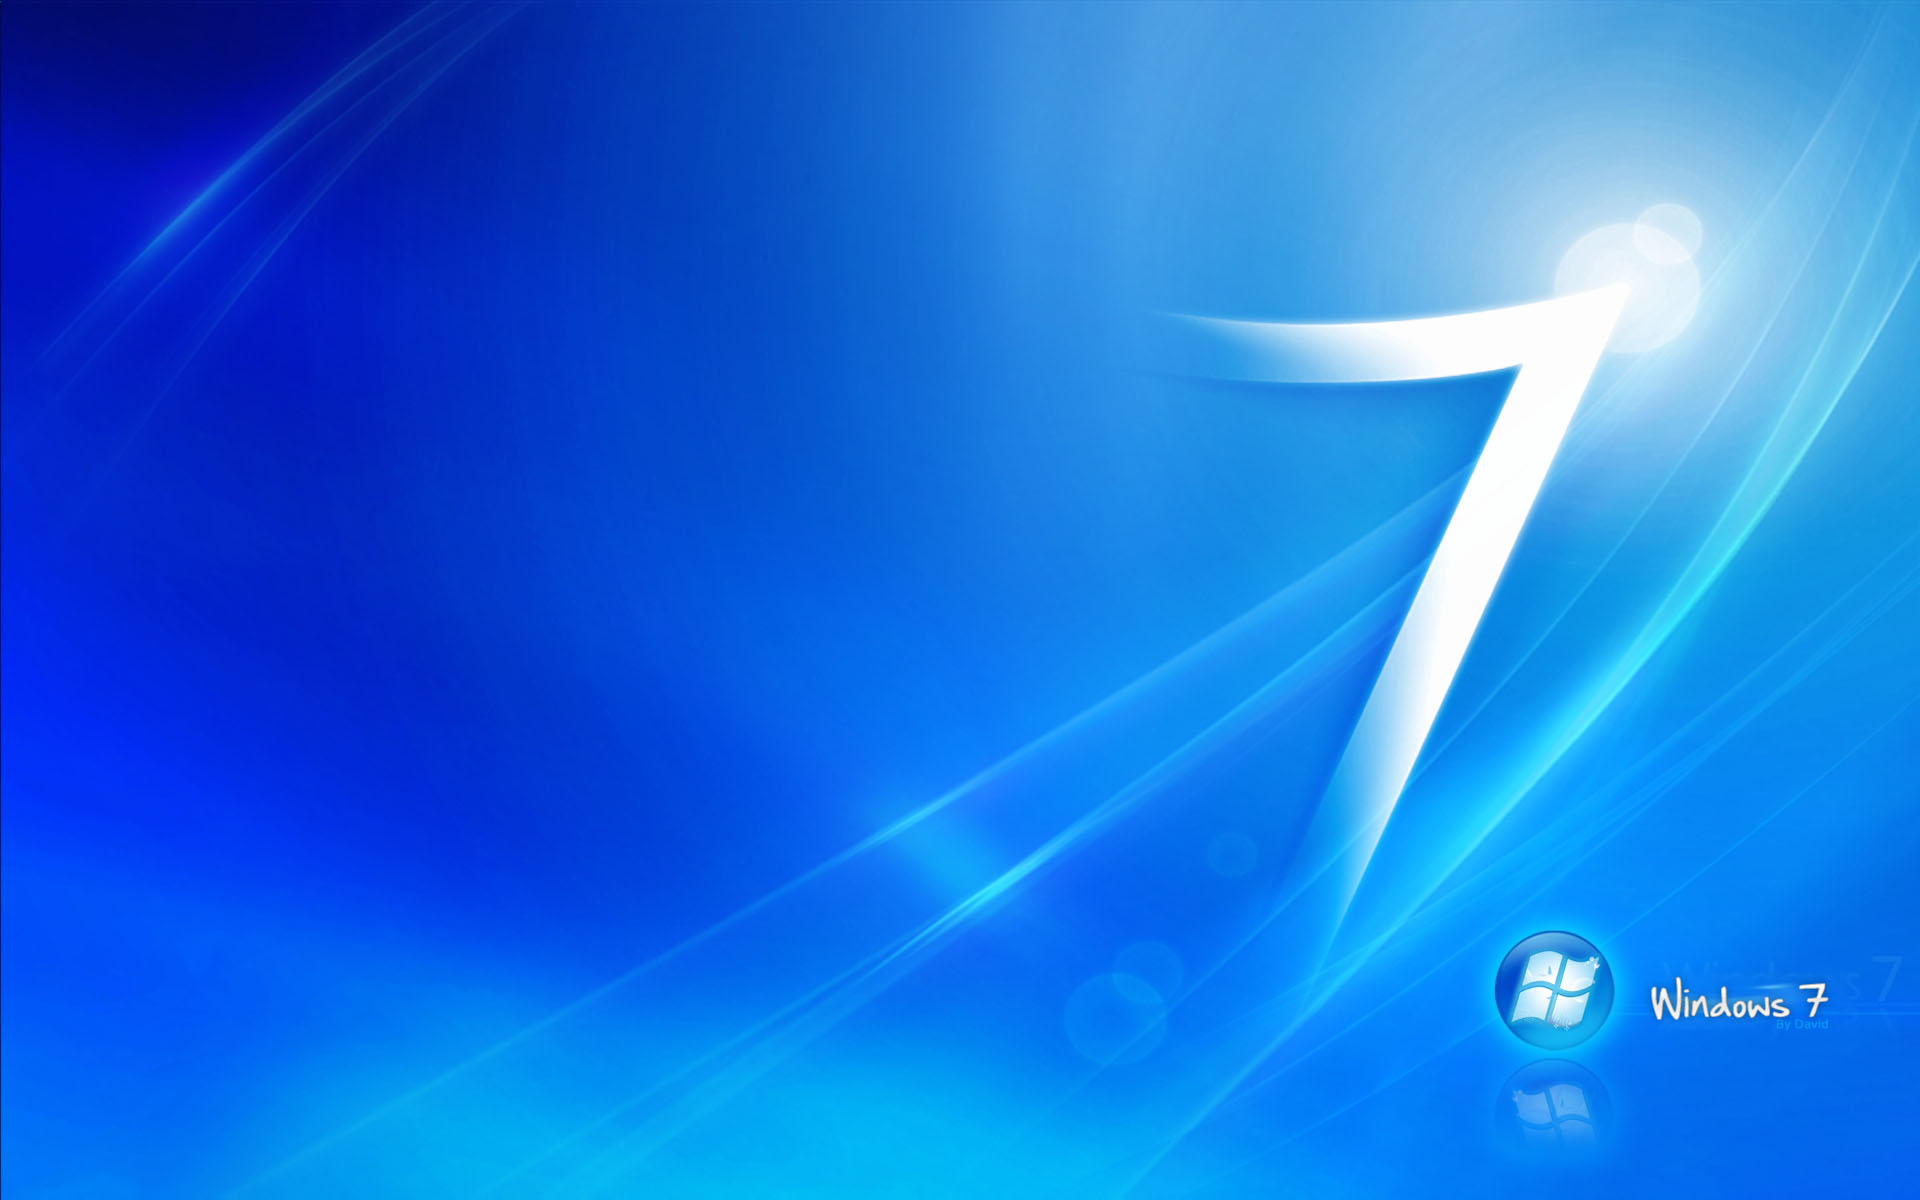 50 Spectacular HQ Windows 7 Wallpapers to Spice Up Your Desktop